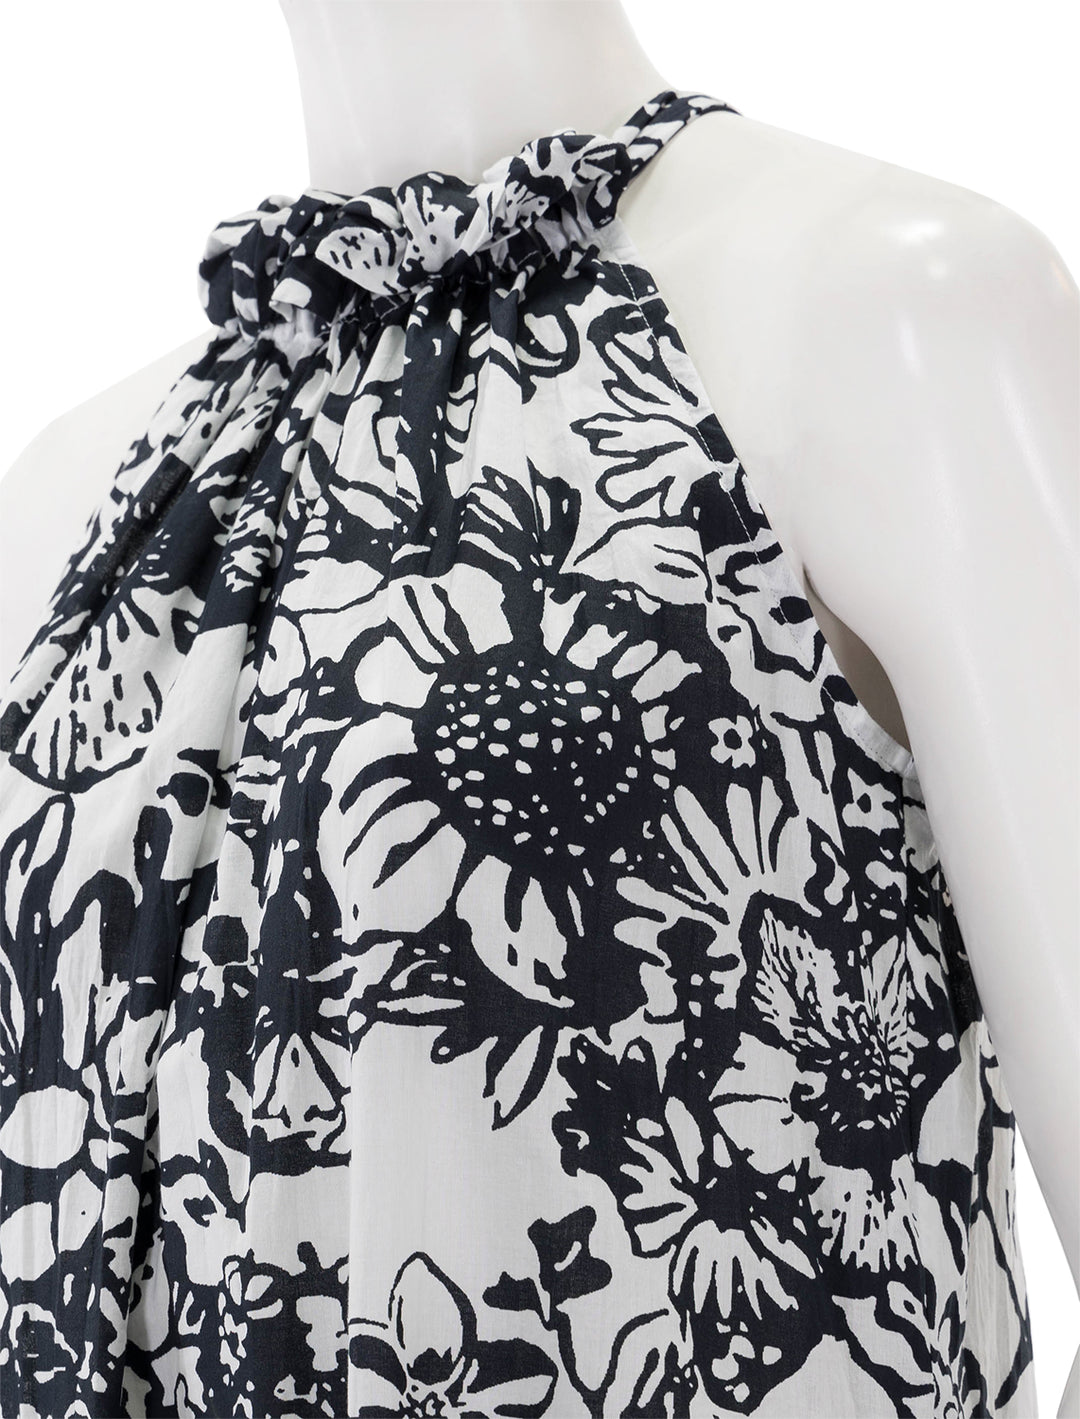 Close-up view of Velvet's penelope dress in black and white.